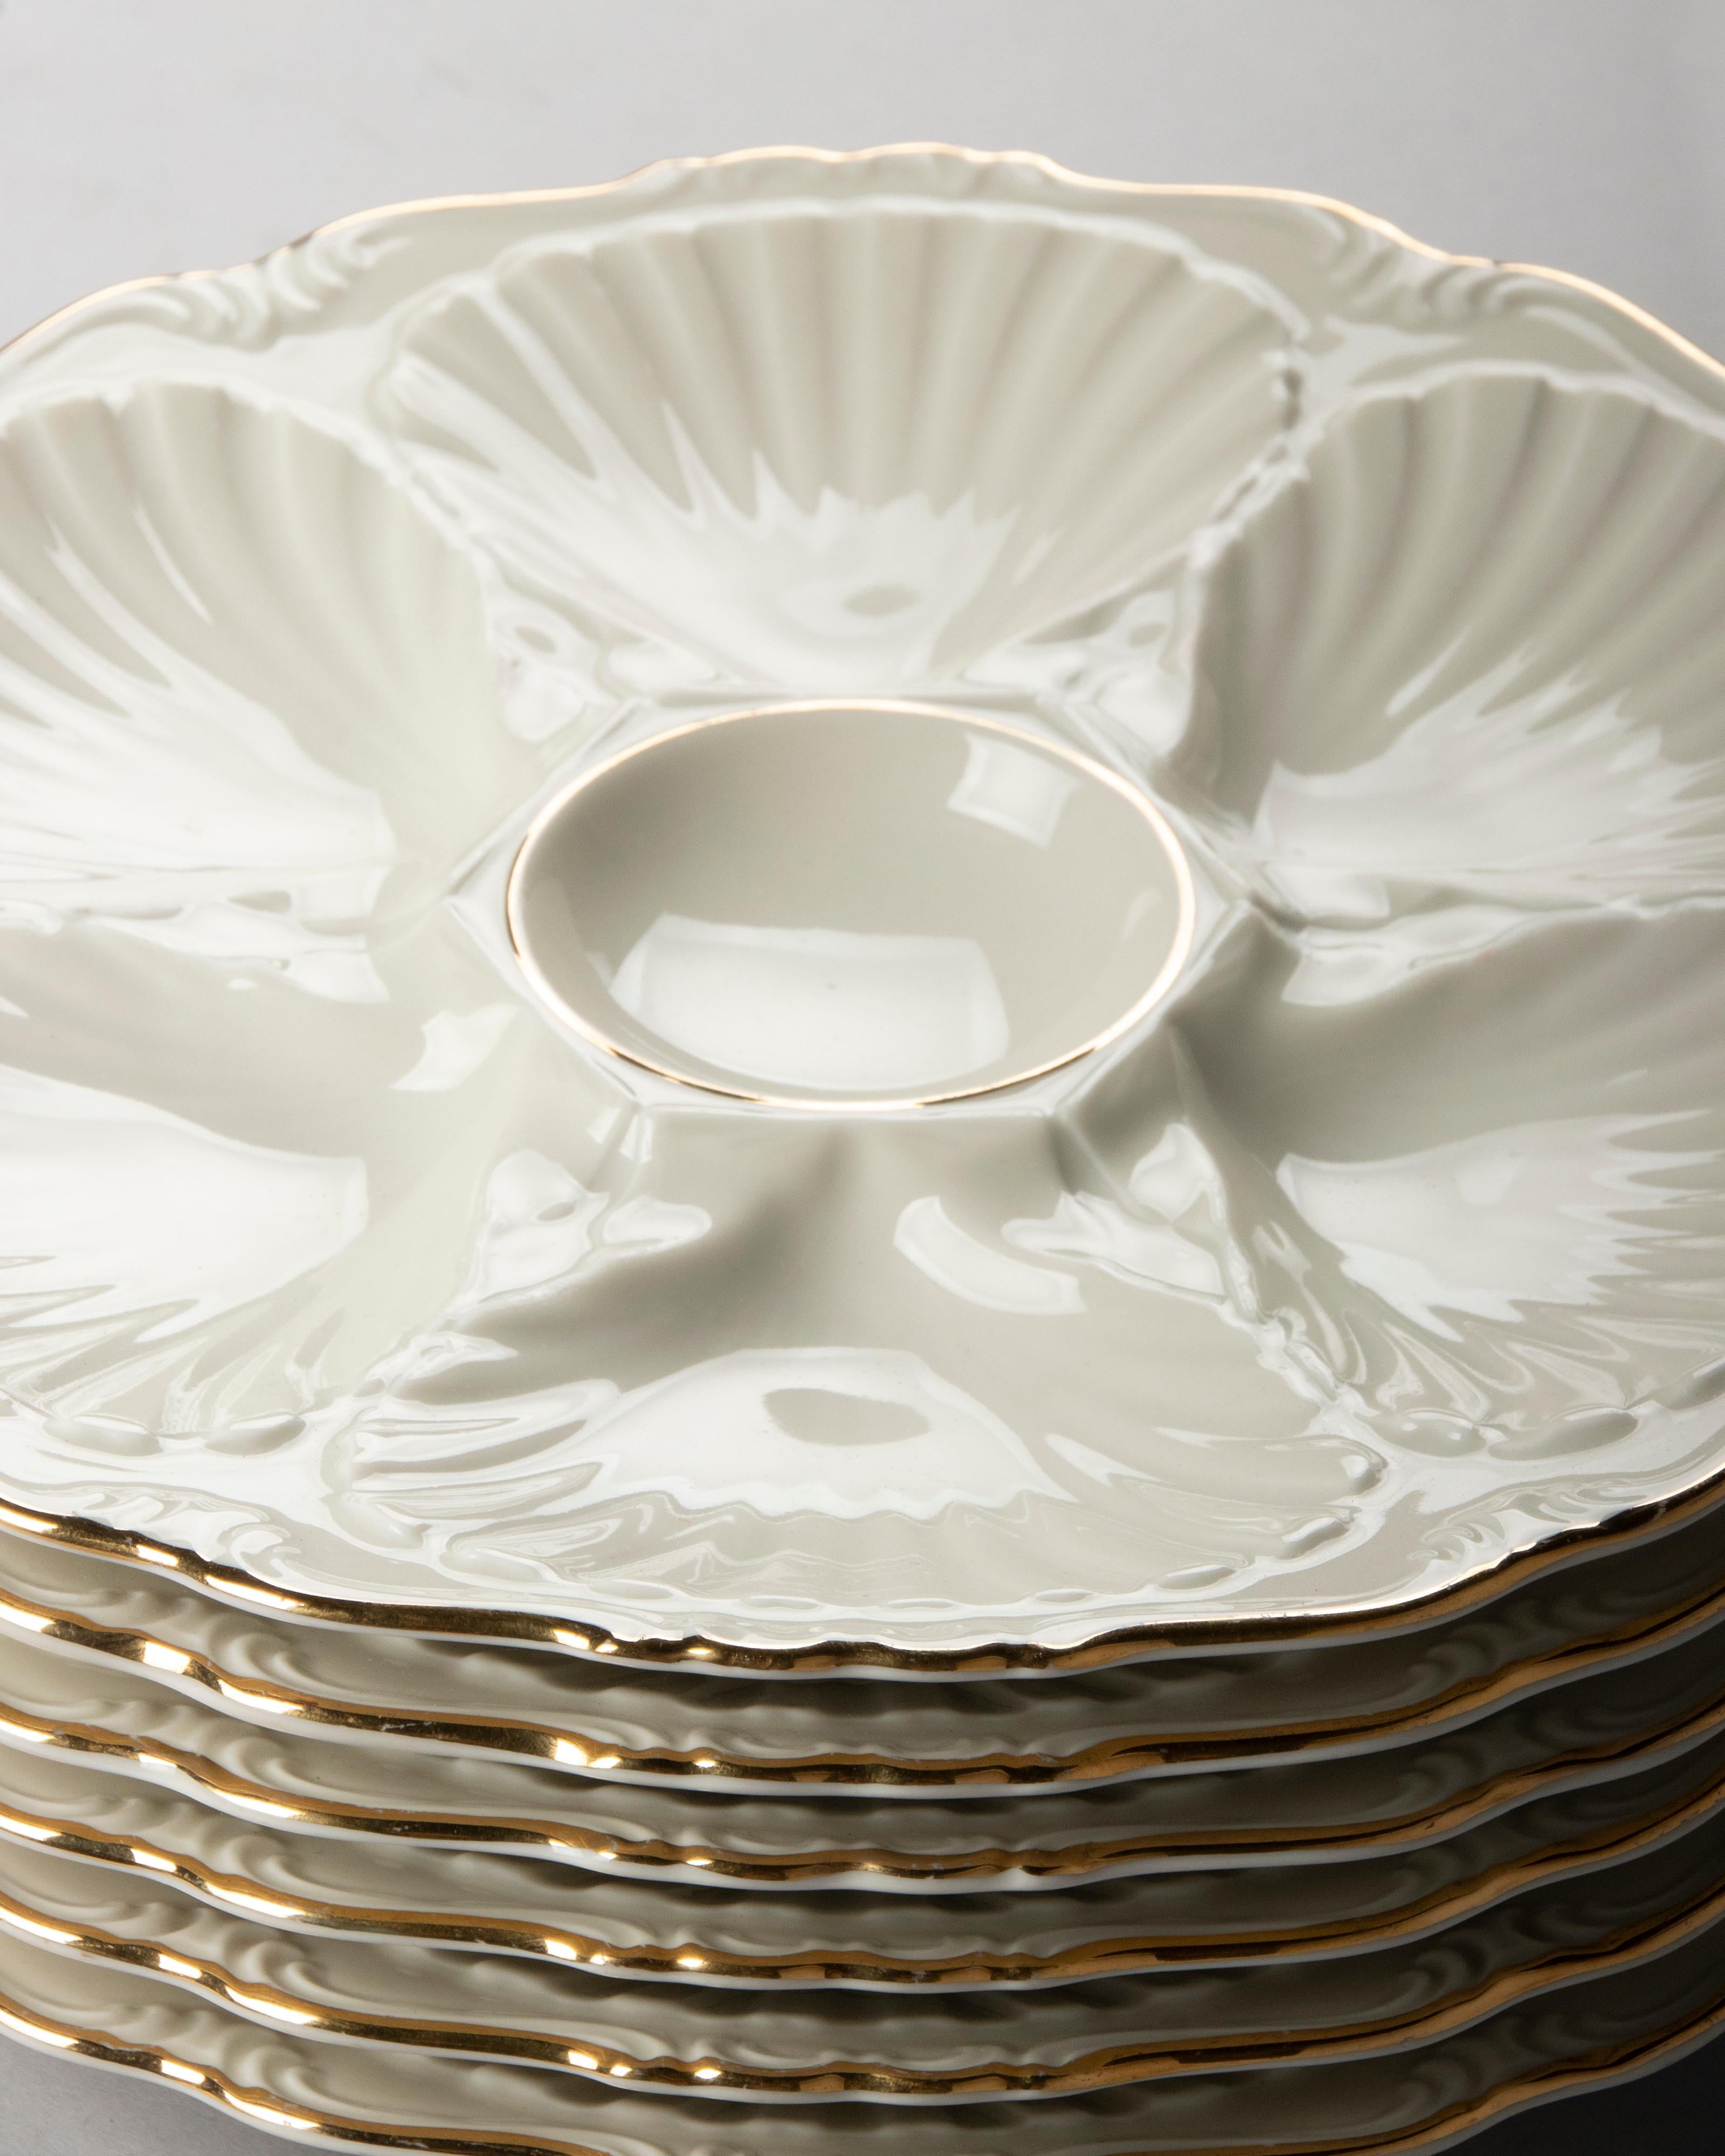 Mid-20th Century Set of 6 Vintage Porcelain Oyster Plates Made by Edelstein Germany For Sale